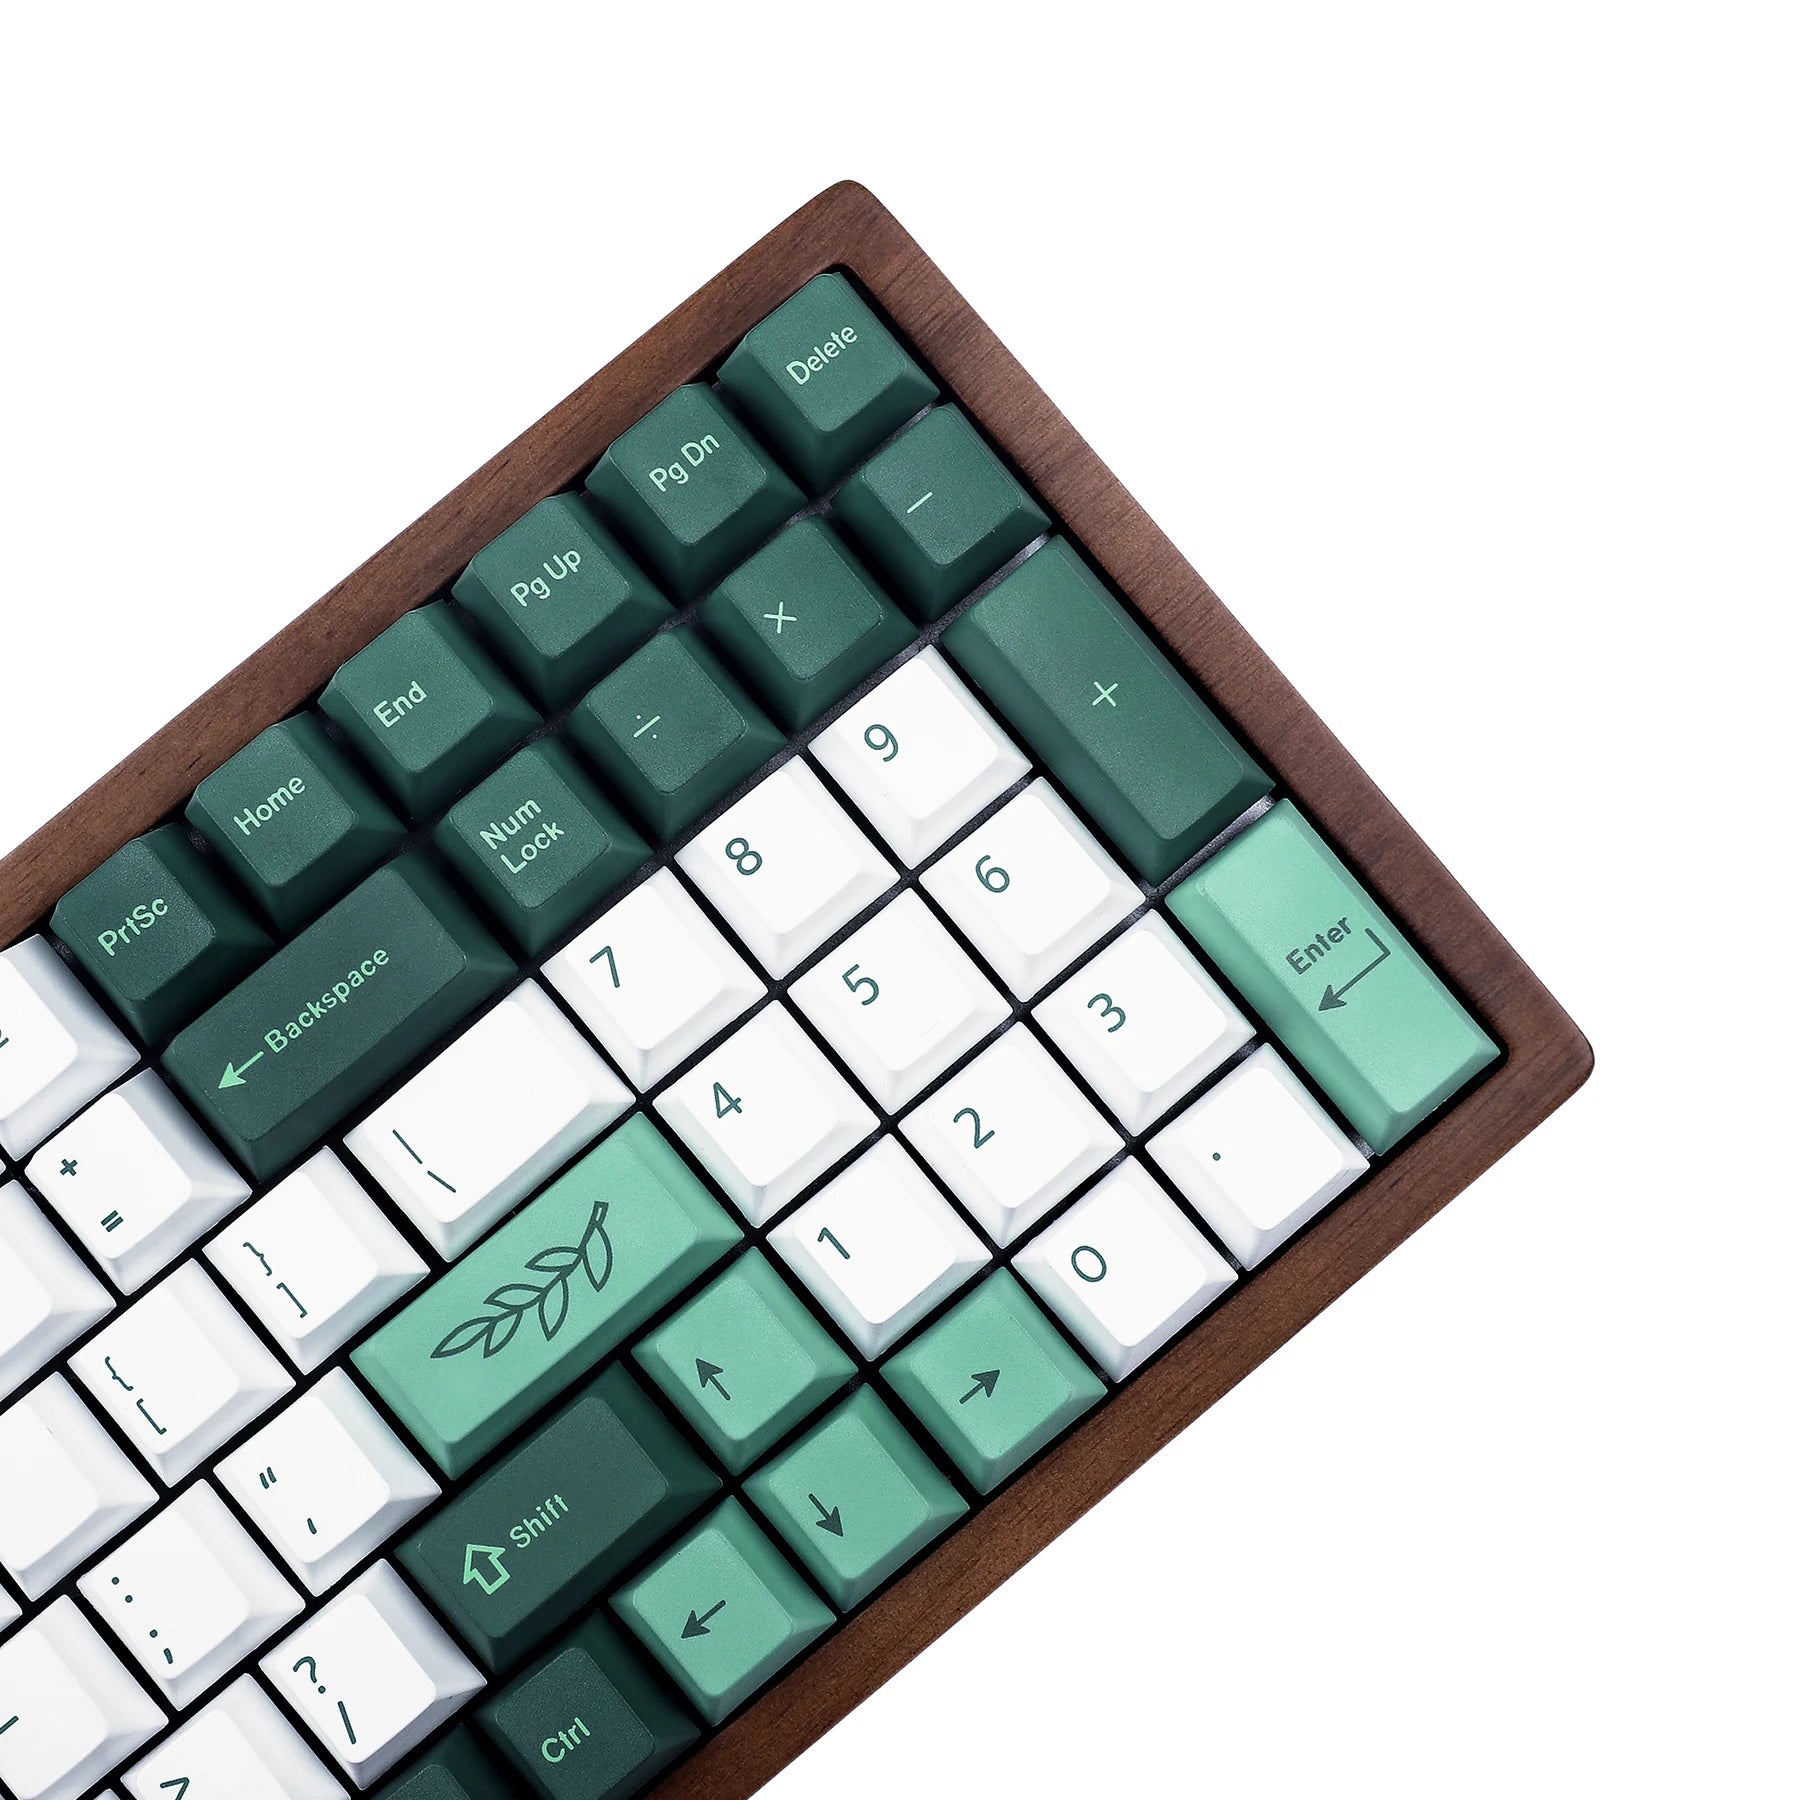 Floral Essence 144 PBT Cherry Keycap Set – ISO Layouts